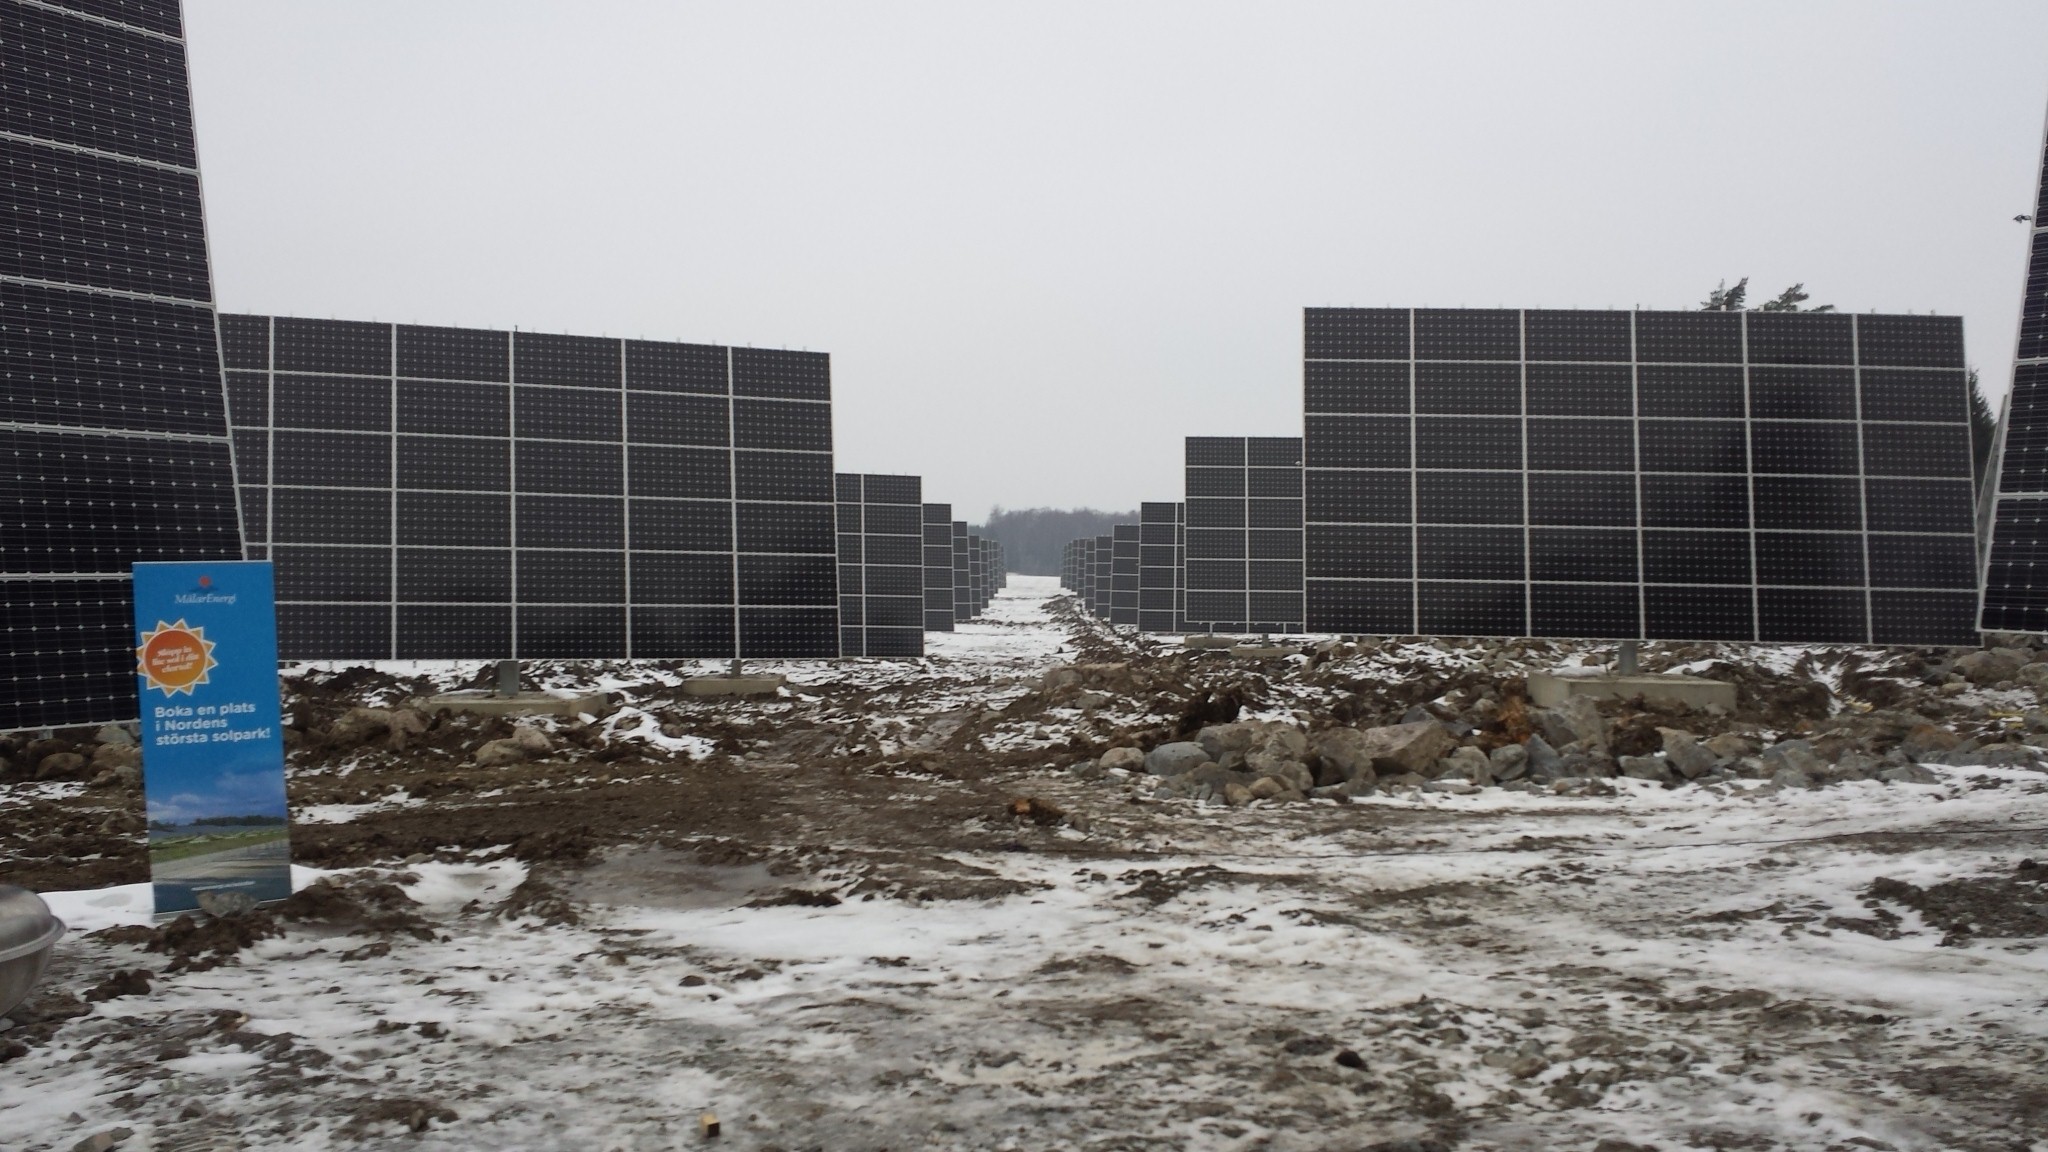 Largest solar park on trackers in Scandinavia